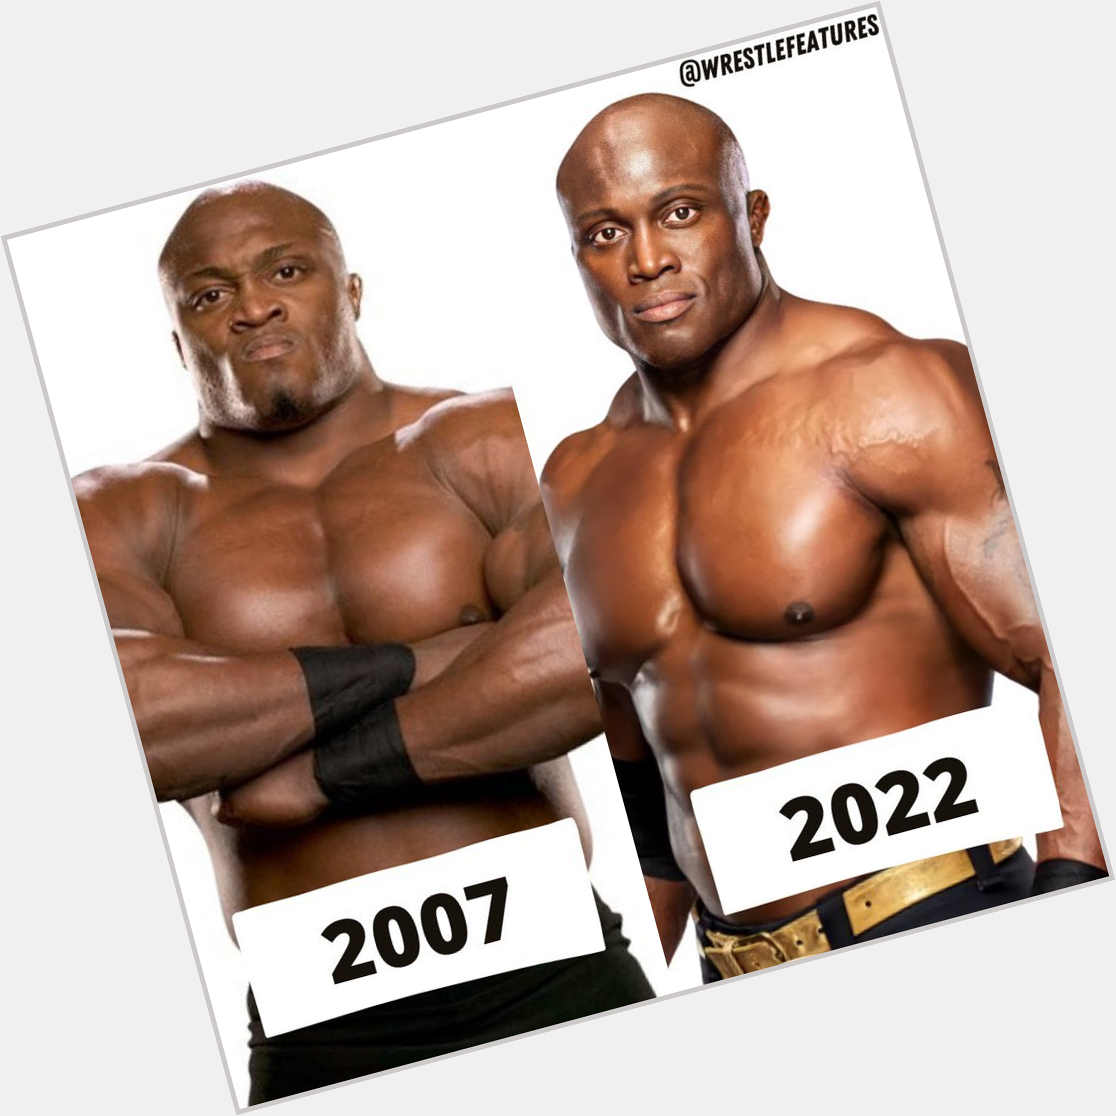  Happy Birthday Bobby Lashley! You look younger now. 